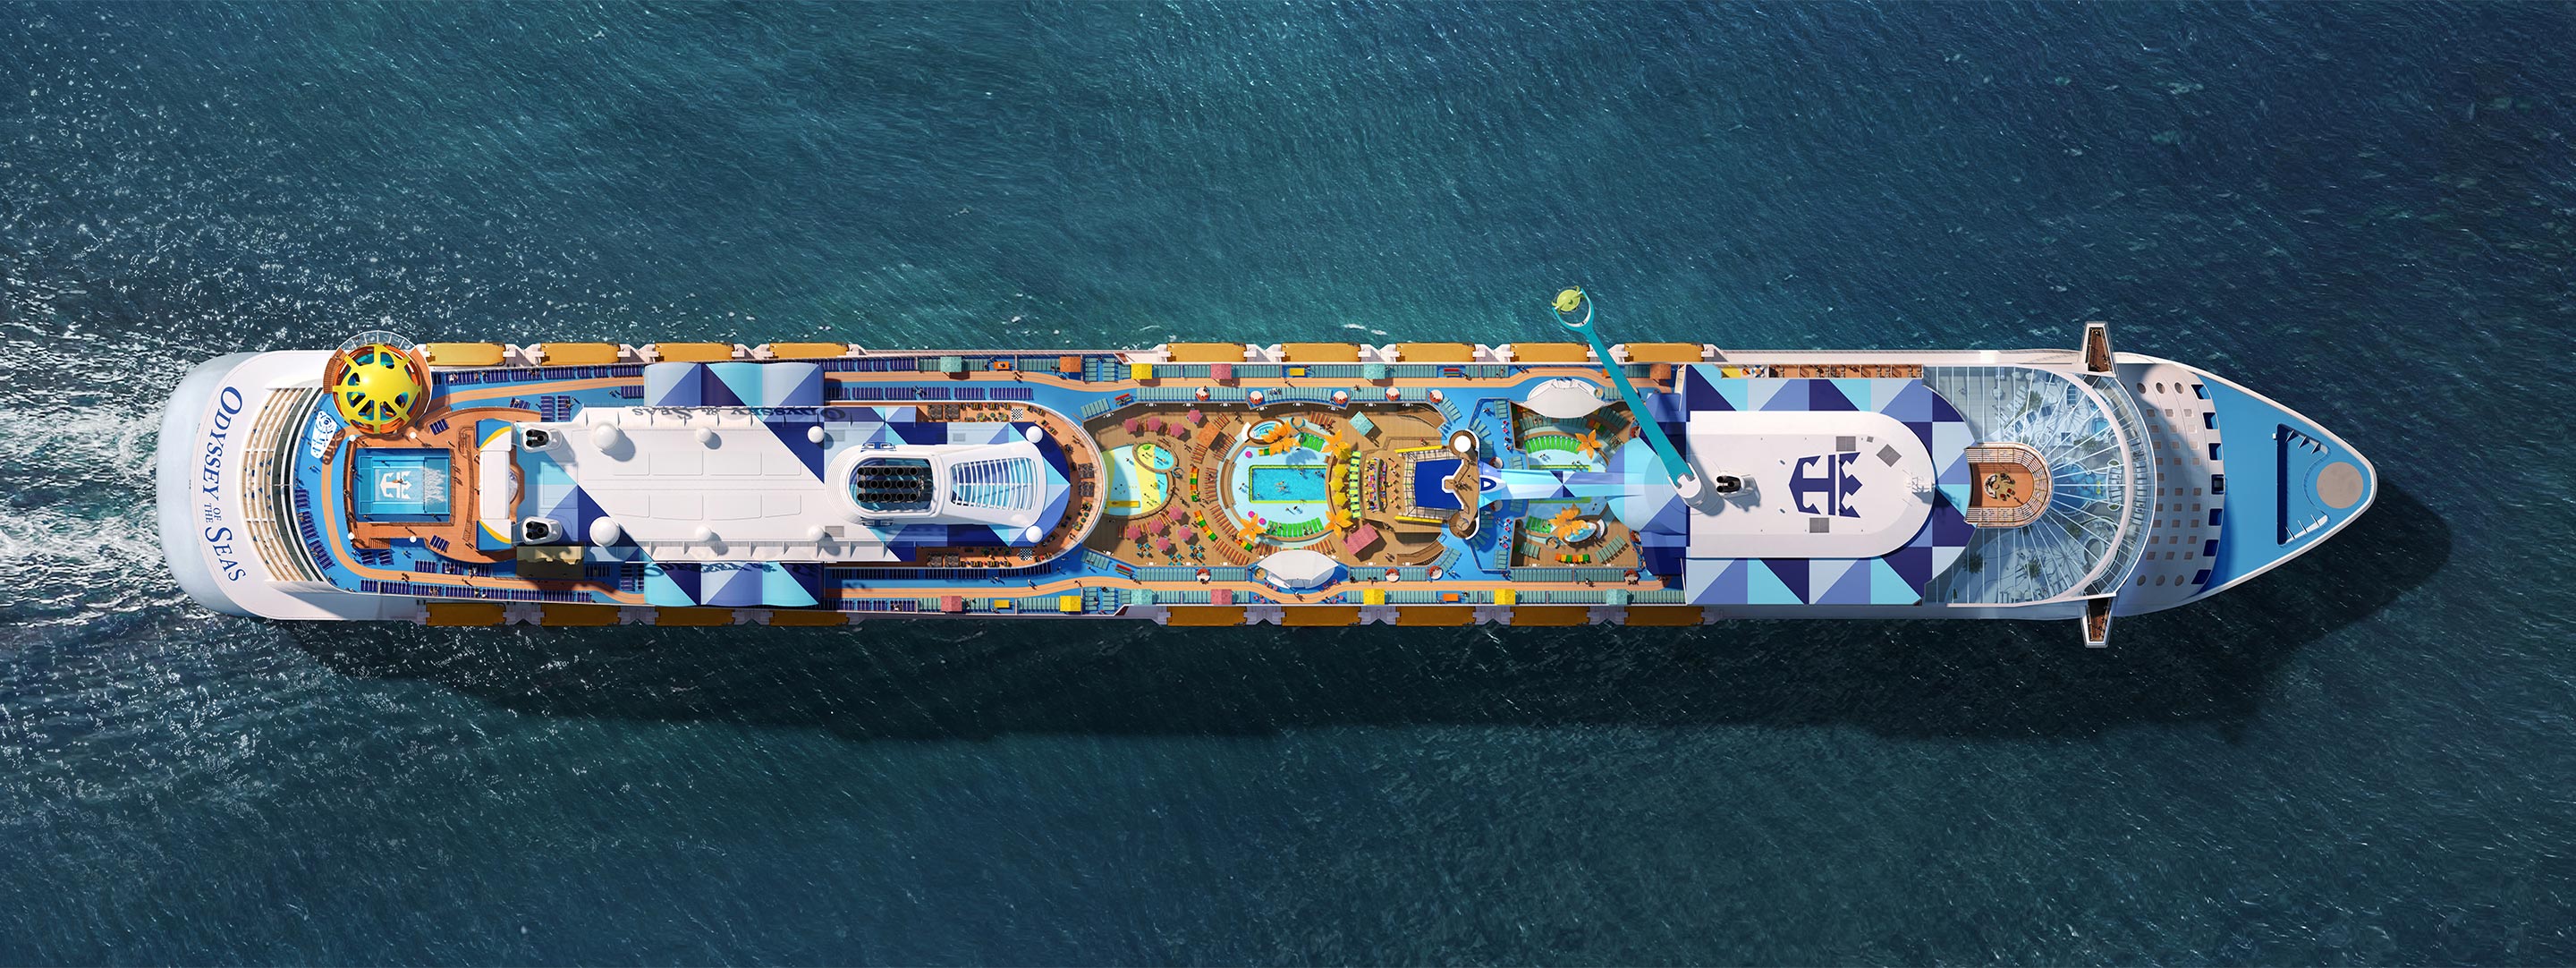 Odyssey of the Seas scheduled for delivery to Royal Caribbean on March 24 | Royal Caribbean Blog